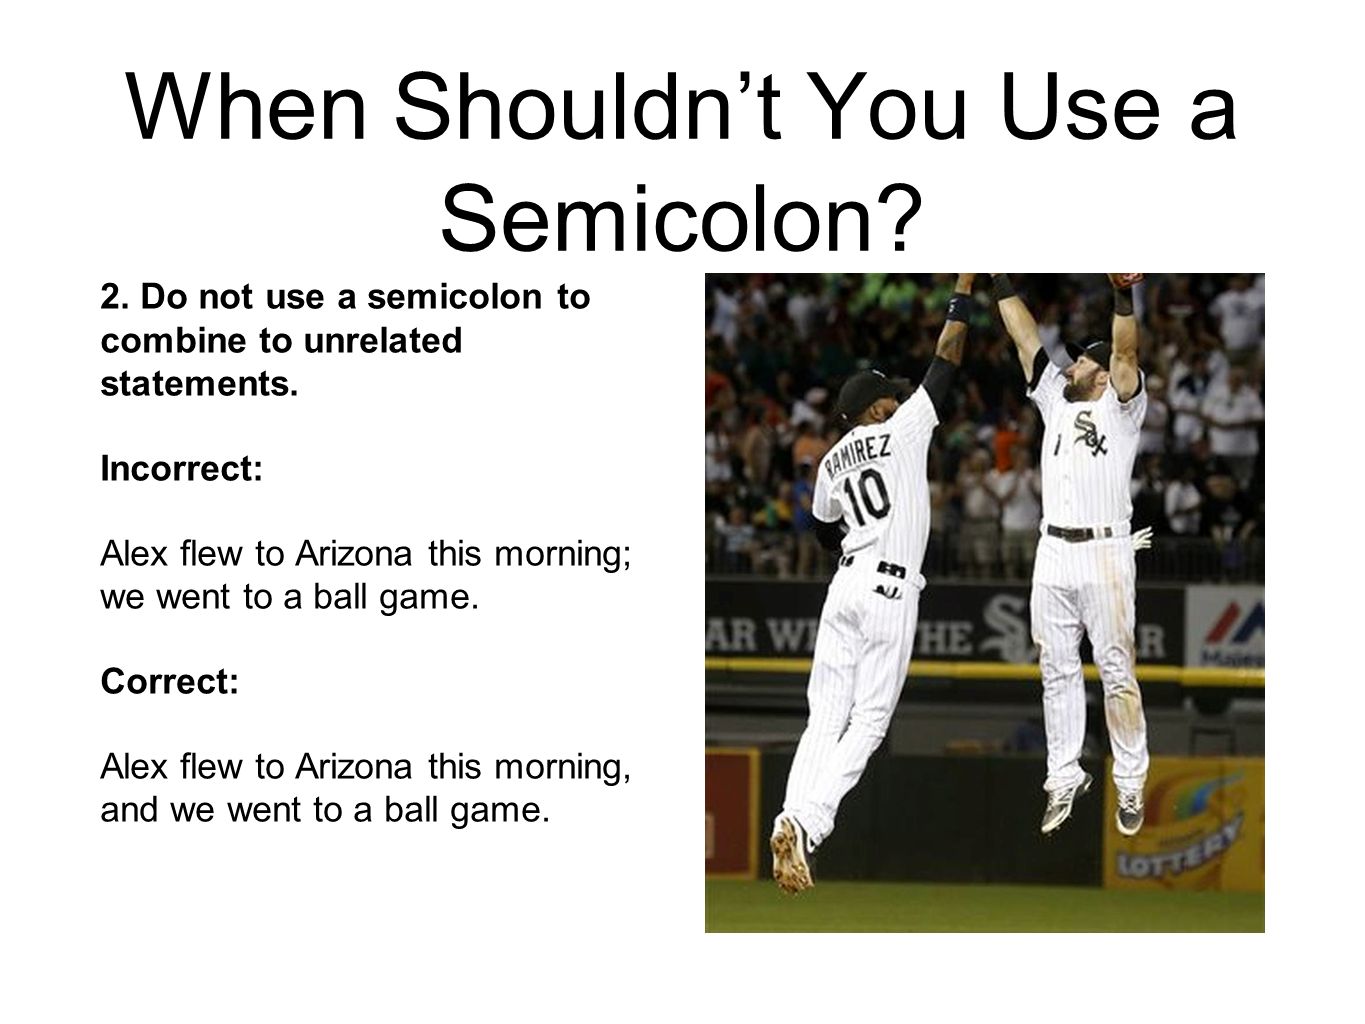 When Shouldn’t You Use a Semicolon. 2. Do not use a semicolon to combine to unrelated statements.